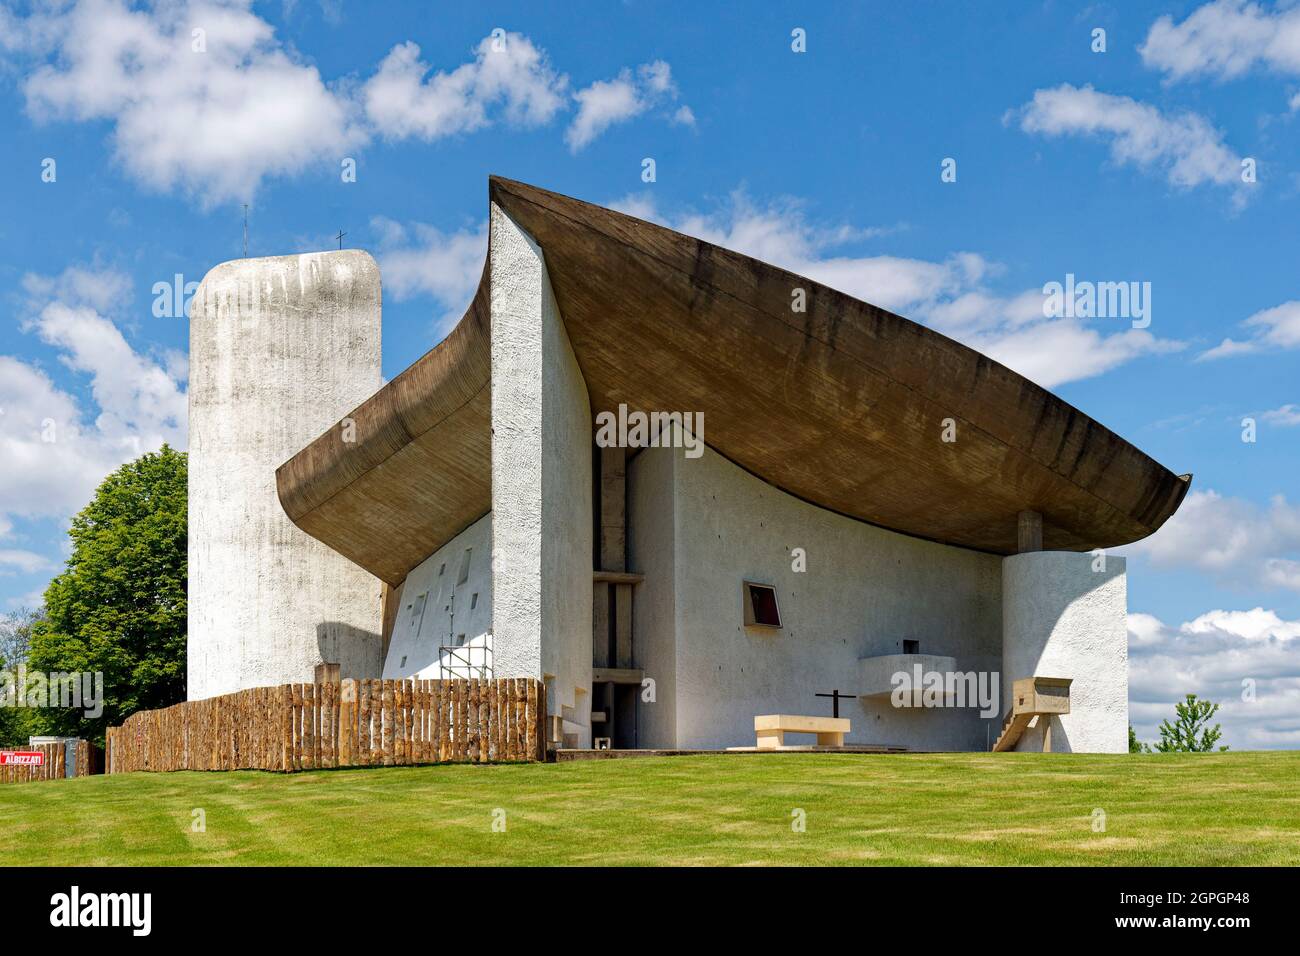 France, Haute Saone, Ronchamp, architectural work of Le Corbusier, listed as World Heritage by UNESCO, Notre Dame du Haut Chapel by the architect Le Corbusier Stock Photo